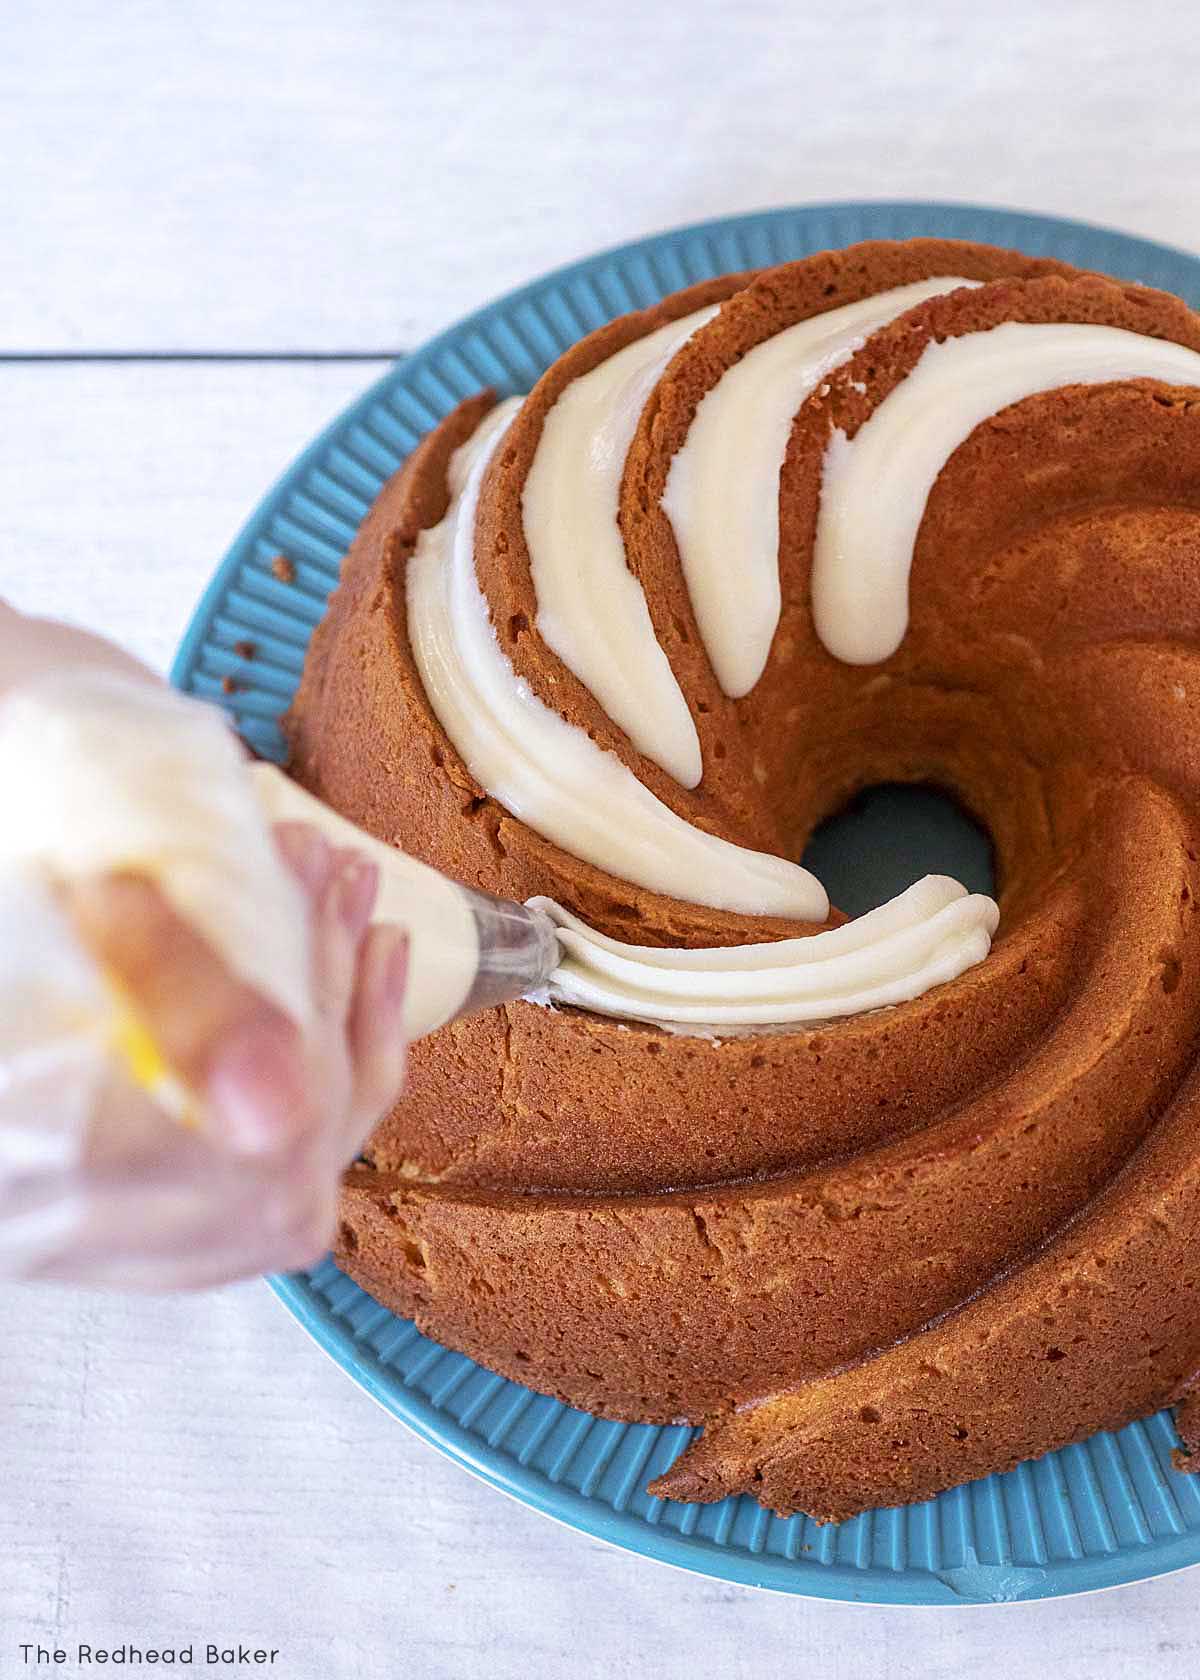 Piping frosting into the grooves of the bundt cake.